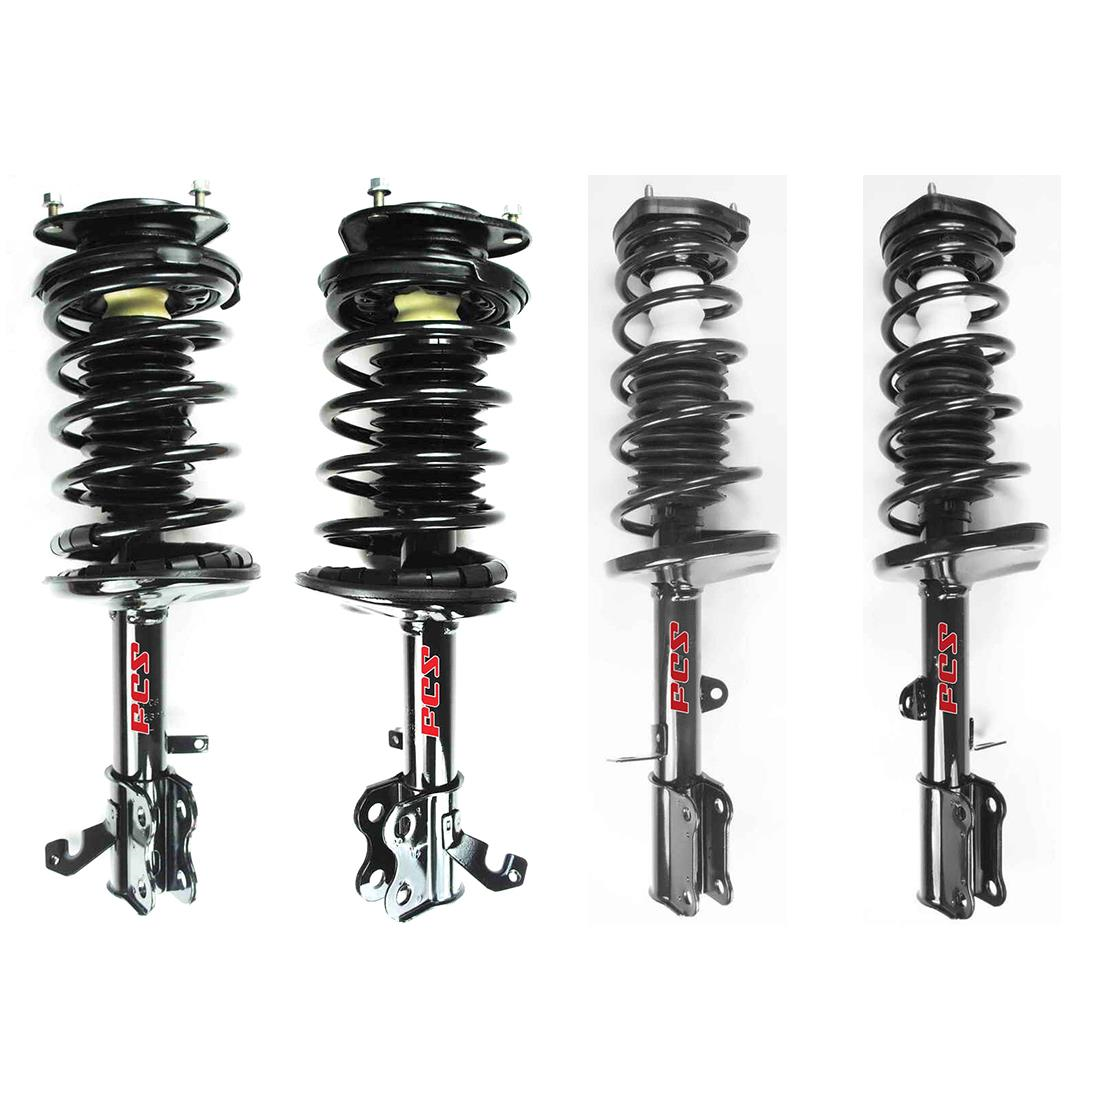 FCS Shocks And Struts Assembly Complete Coil Spring Suspension For Chevrolet Prizm 1998 1999 2000 2001 2002 For Toyota Corolla 1993 1994 1995 1996 1997 1998 1999 2000 2001 2002 - image 1 of 9